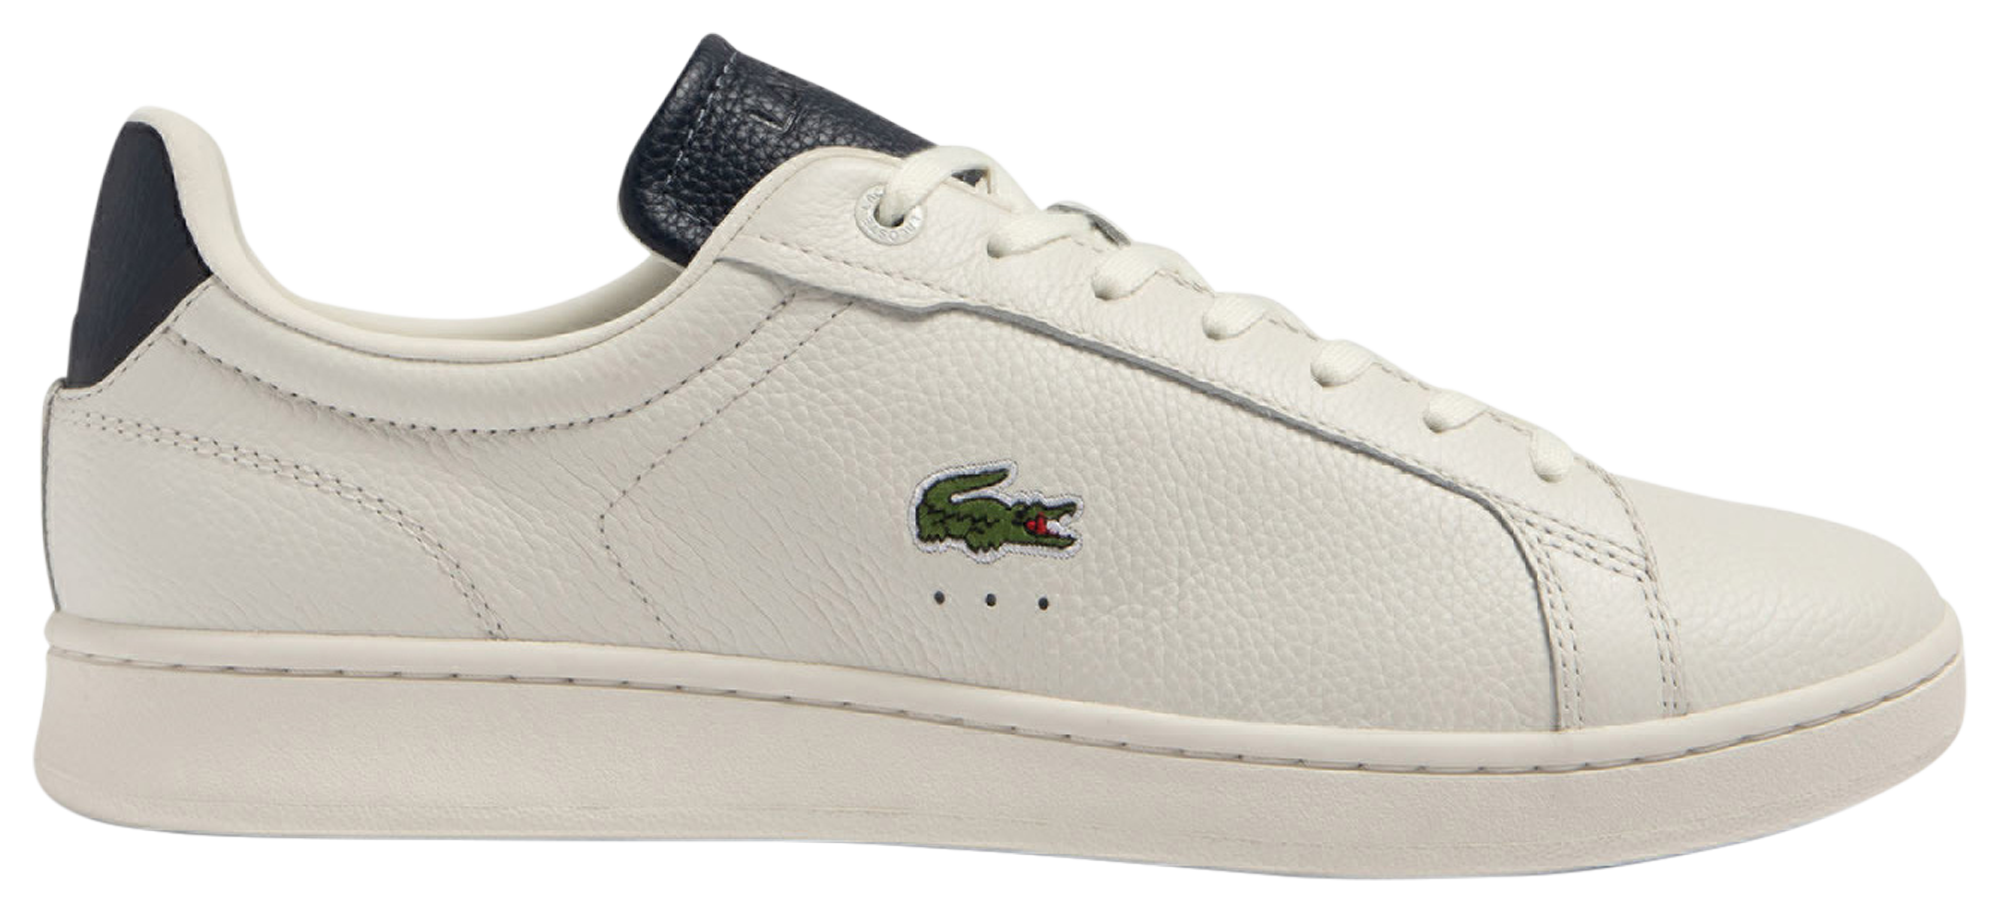 Lacoste Carnaby Pro Leather  - Men's